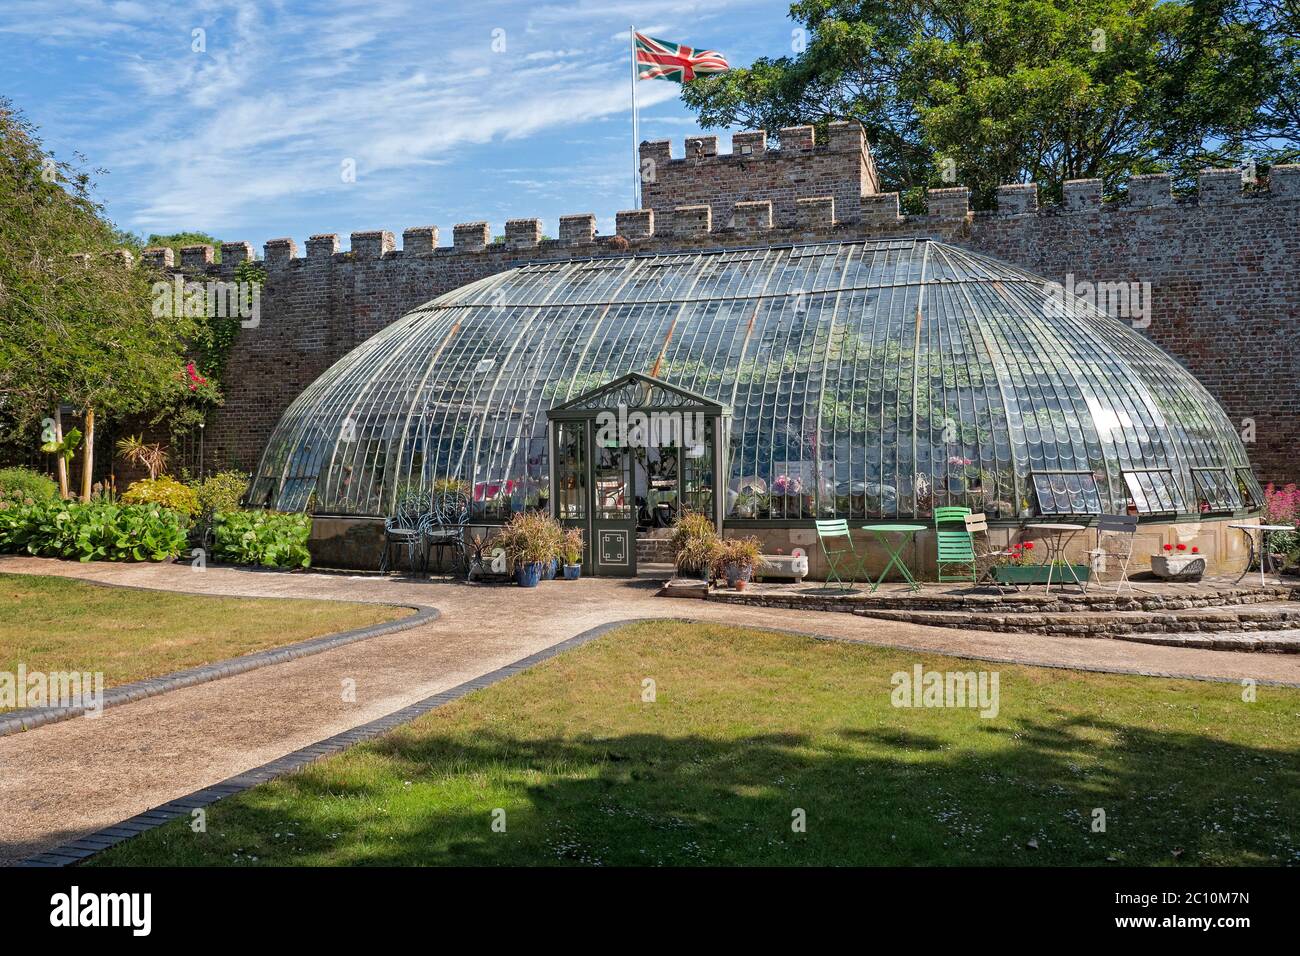 The Italianate Glasshouse at King George VI Park Ramsgate Thanet Kent UK Banque D'Images